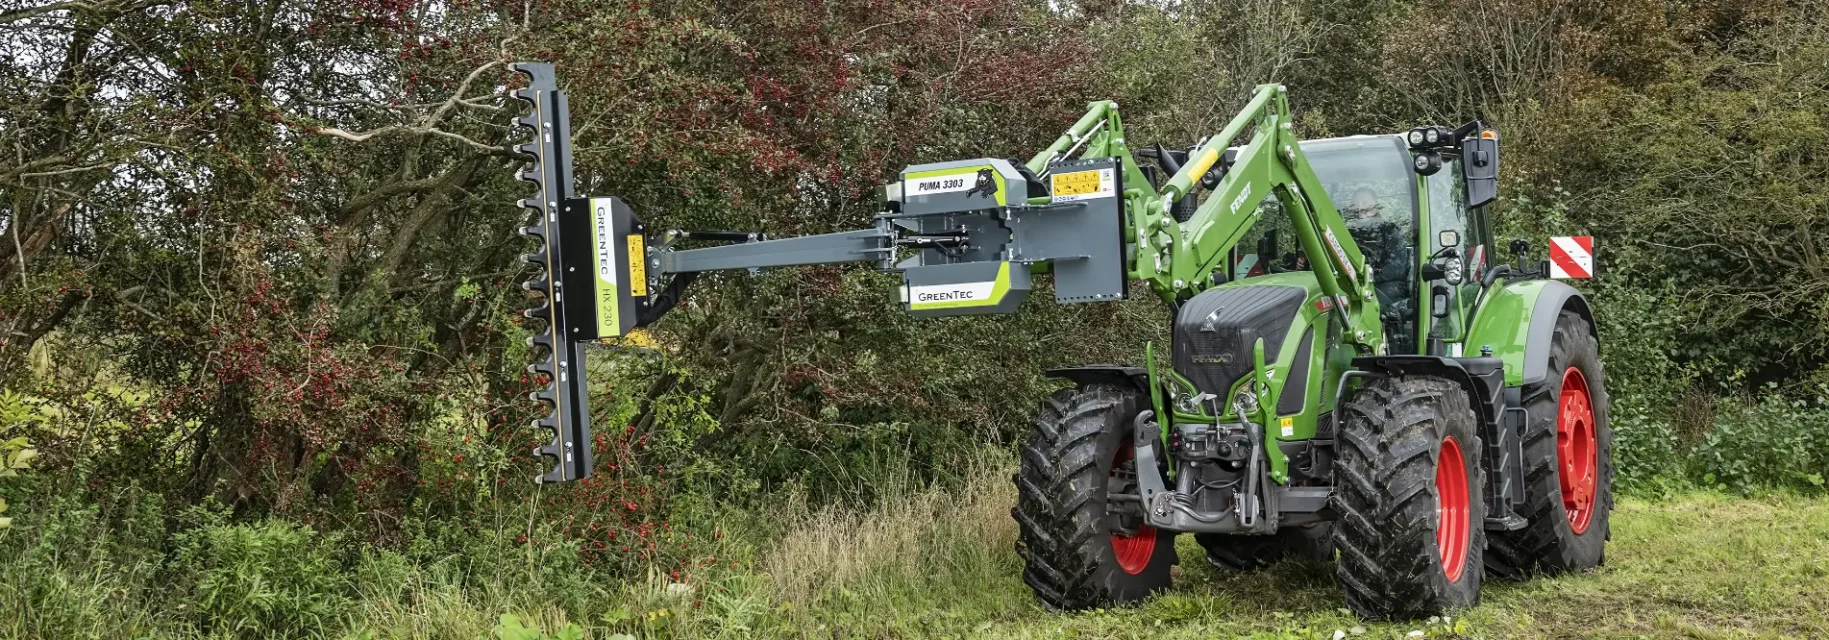 Hedge trimmer attachment for front loader tractor